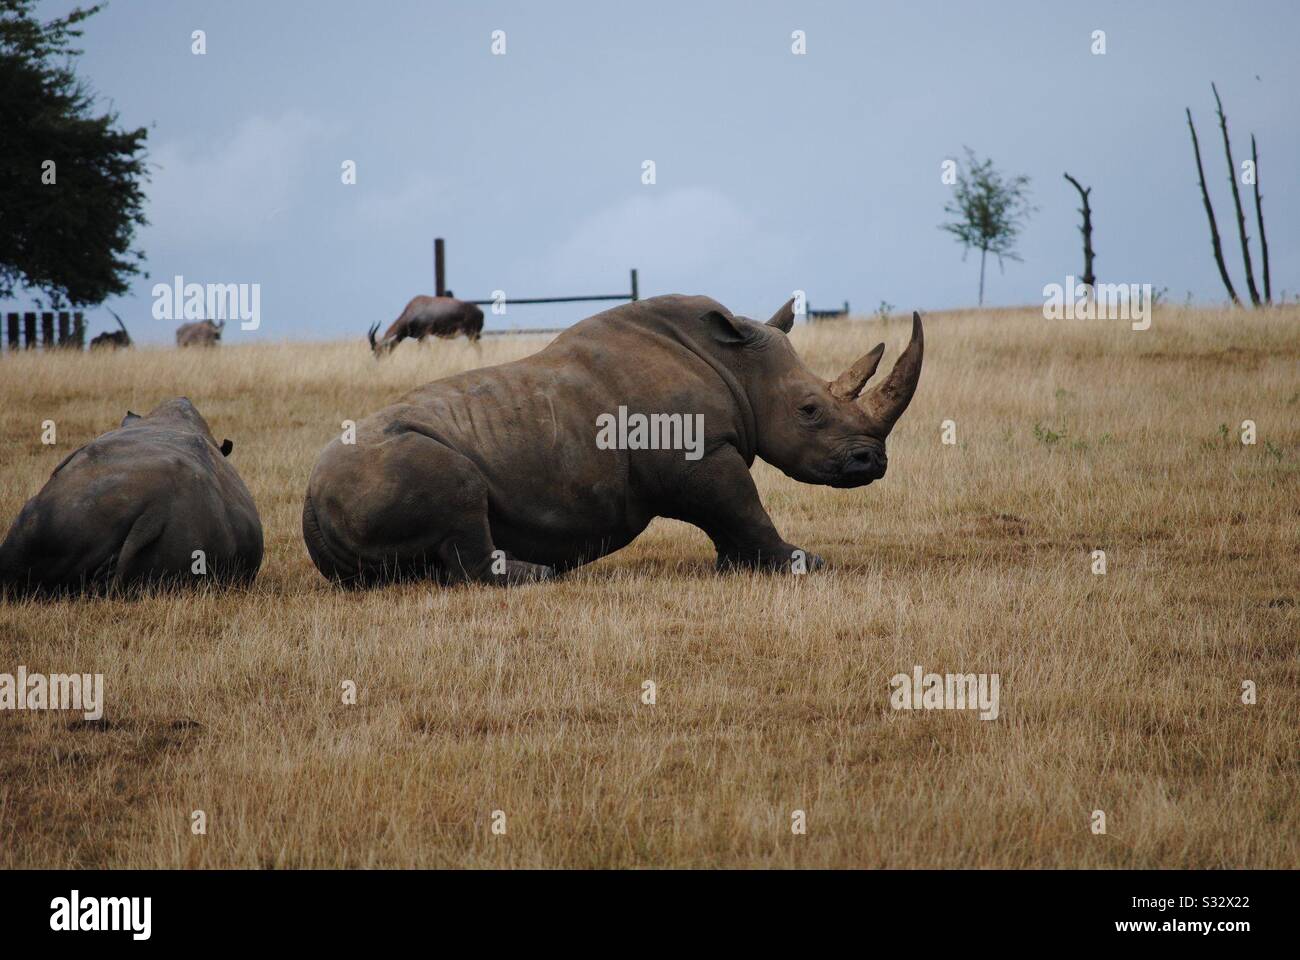 Chilling Rhino Banque D'Images